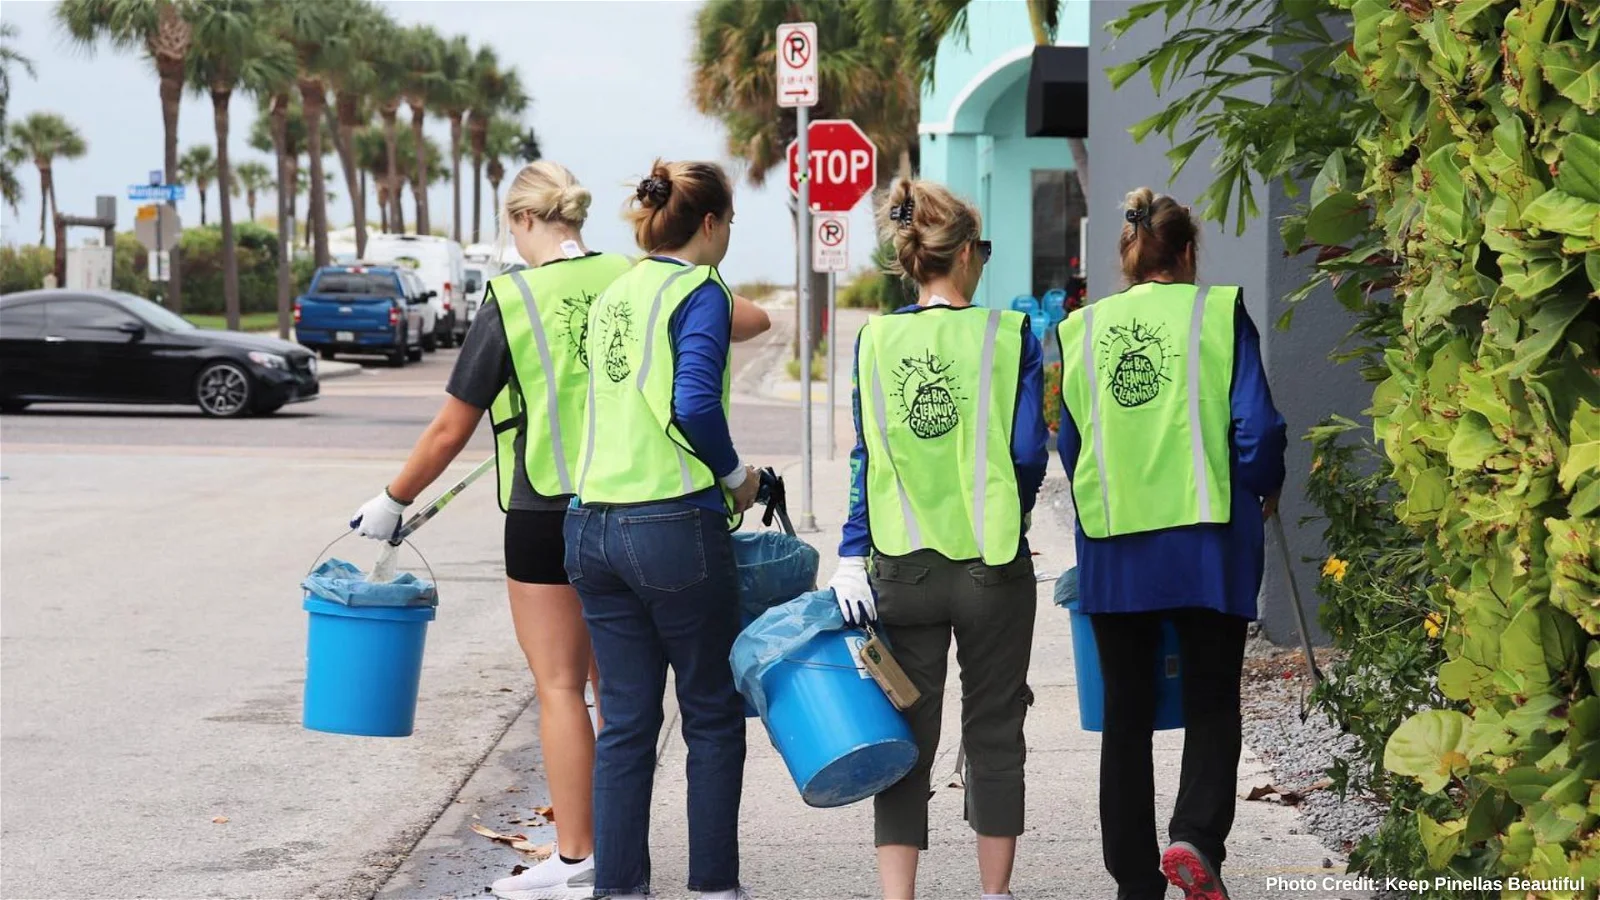 Keep Pinellas Beautiful members cleaning up trash in Clearwater